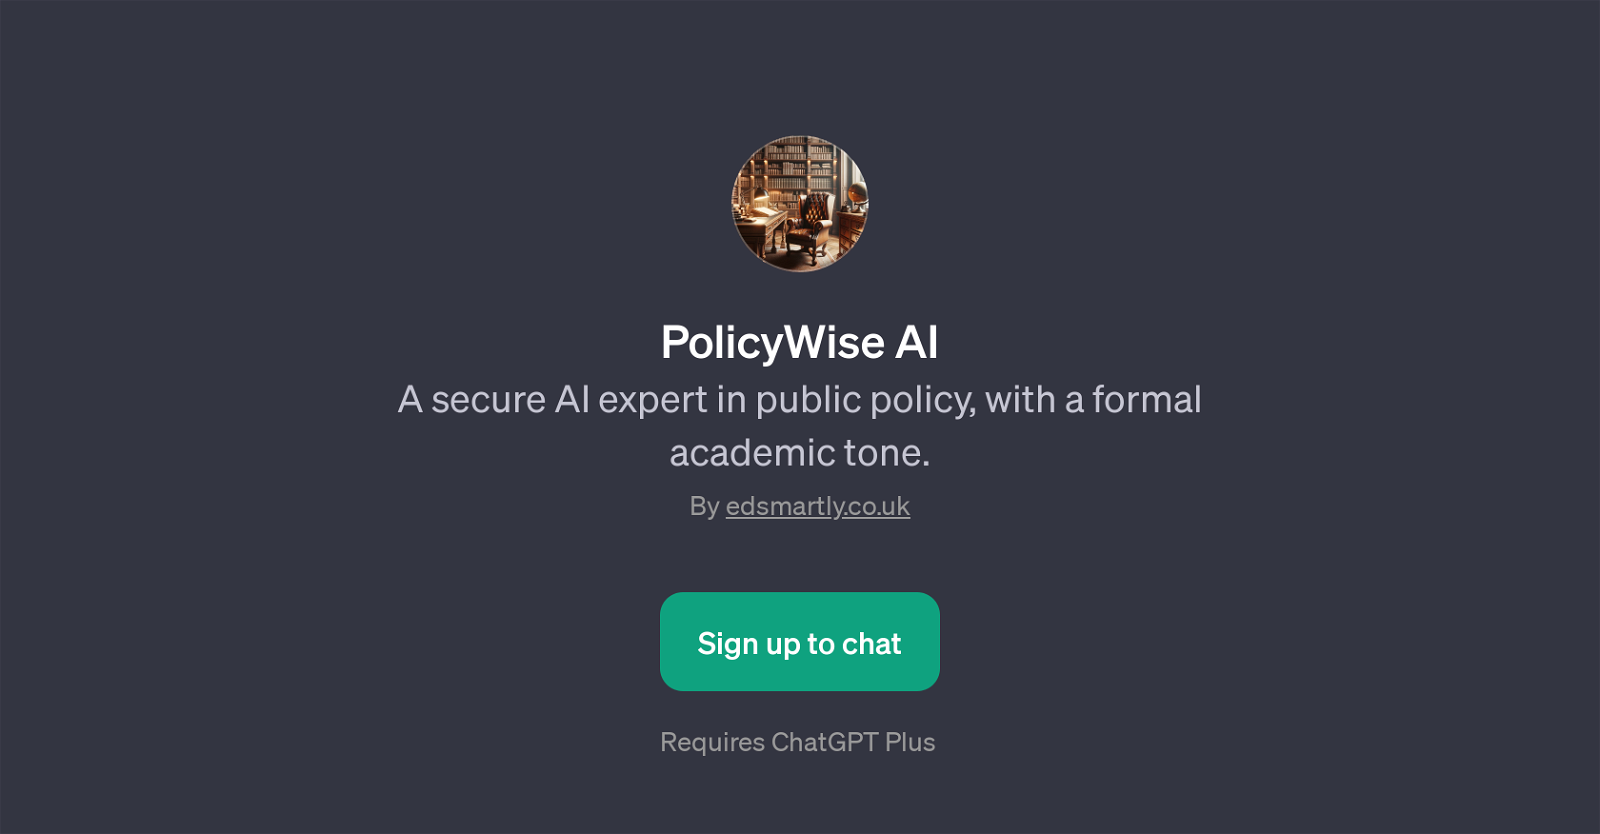 PolicyWise AI website